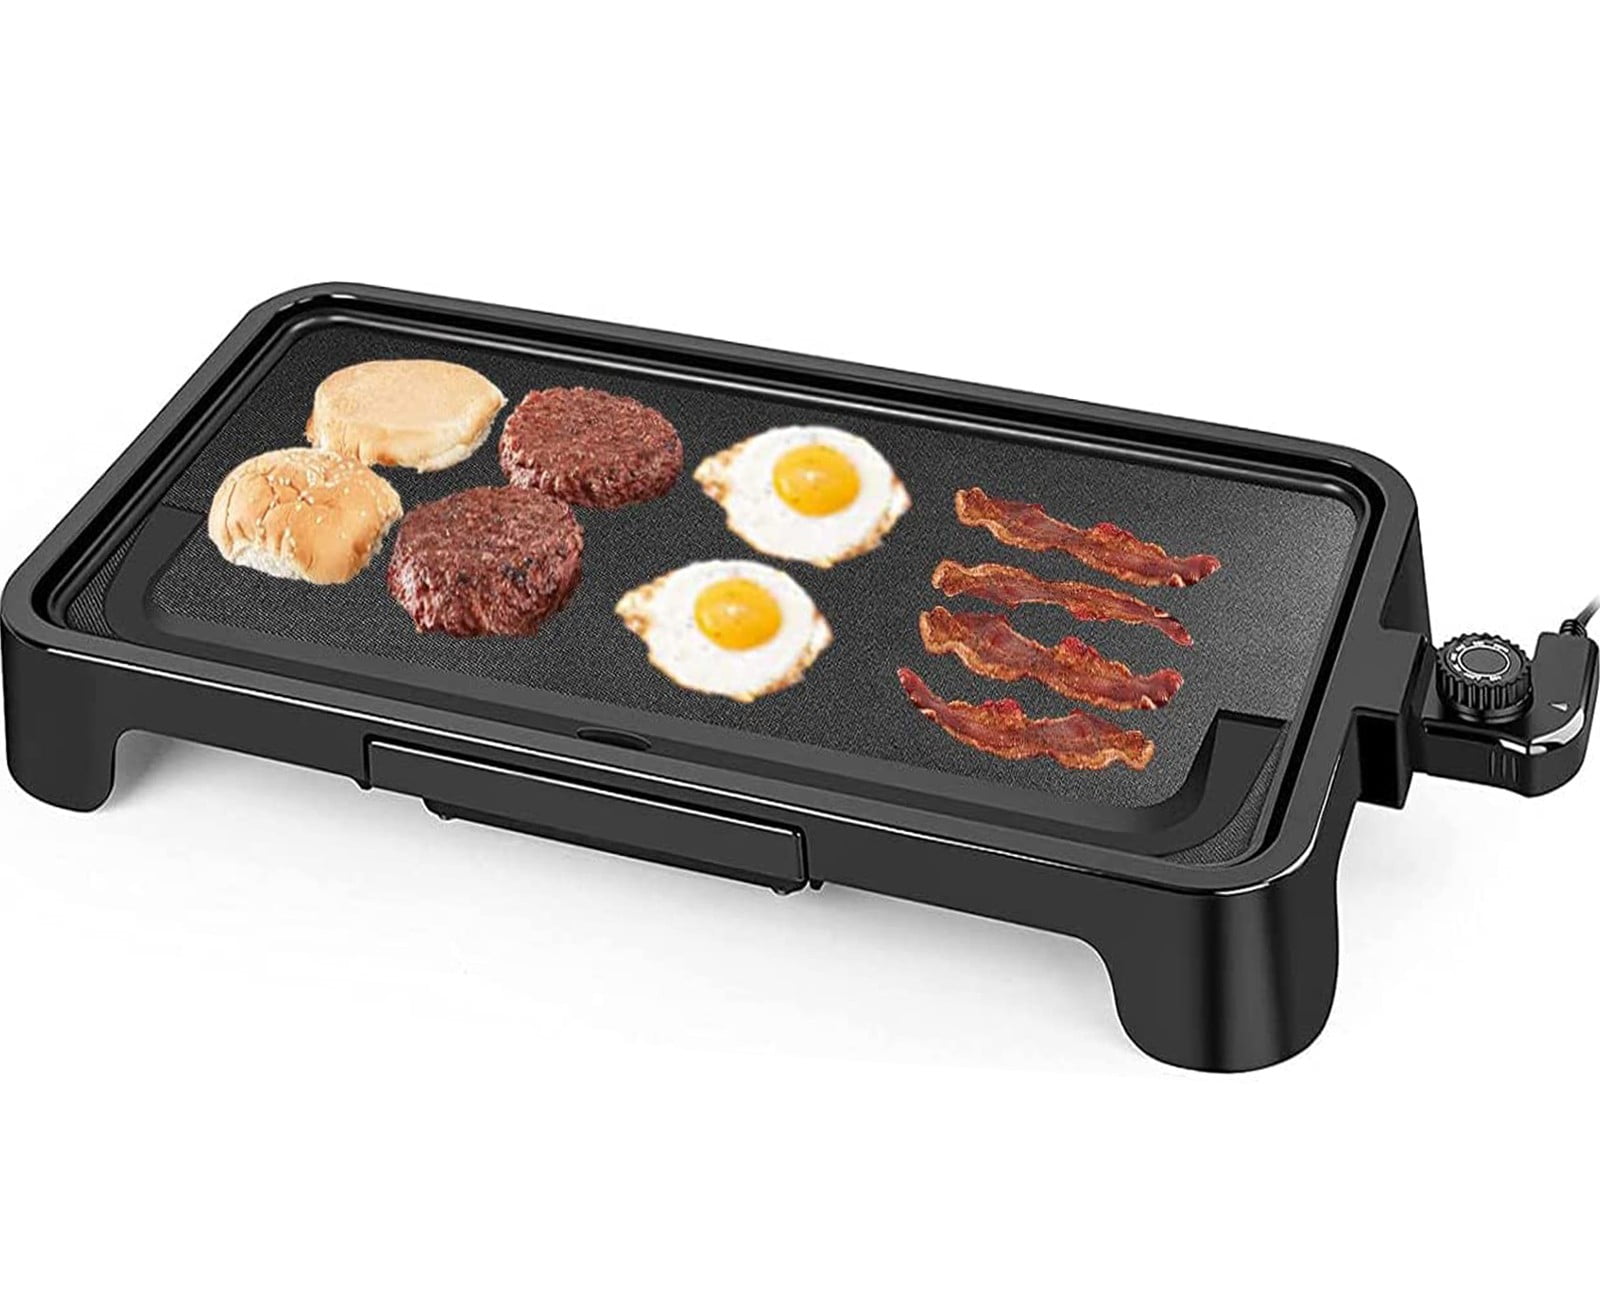 YONGSTYLE Pancake Indoor Grill Electric 22 inch Extra Large Electric Griddle  ,Family sized Griddle Electric Non-stick for Pancakes,Burgers,  Quesadillas,Breakfast, Lunch ,Cast Aluminum Griddle 1600W